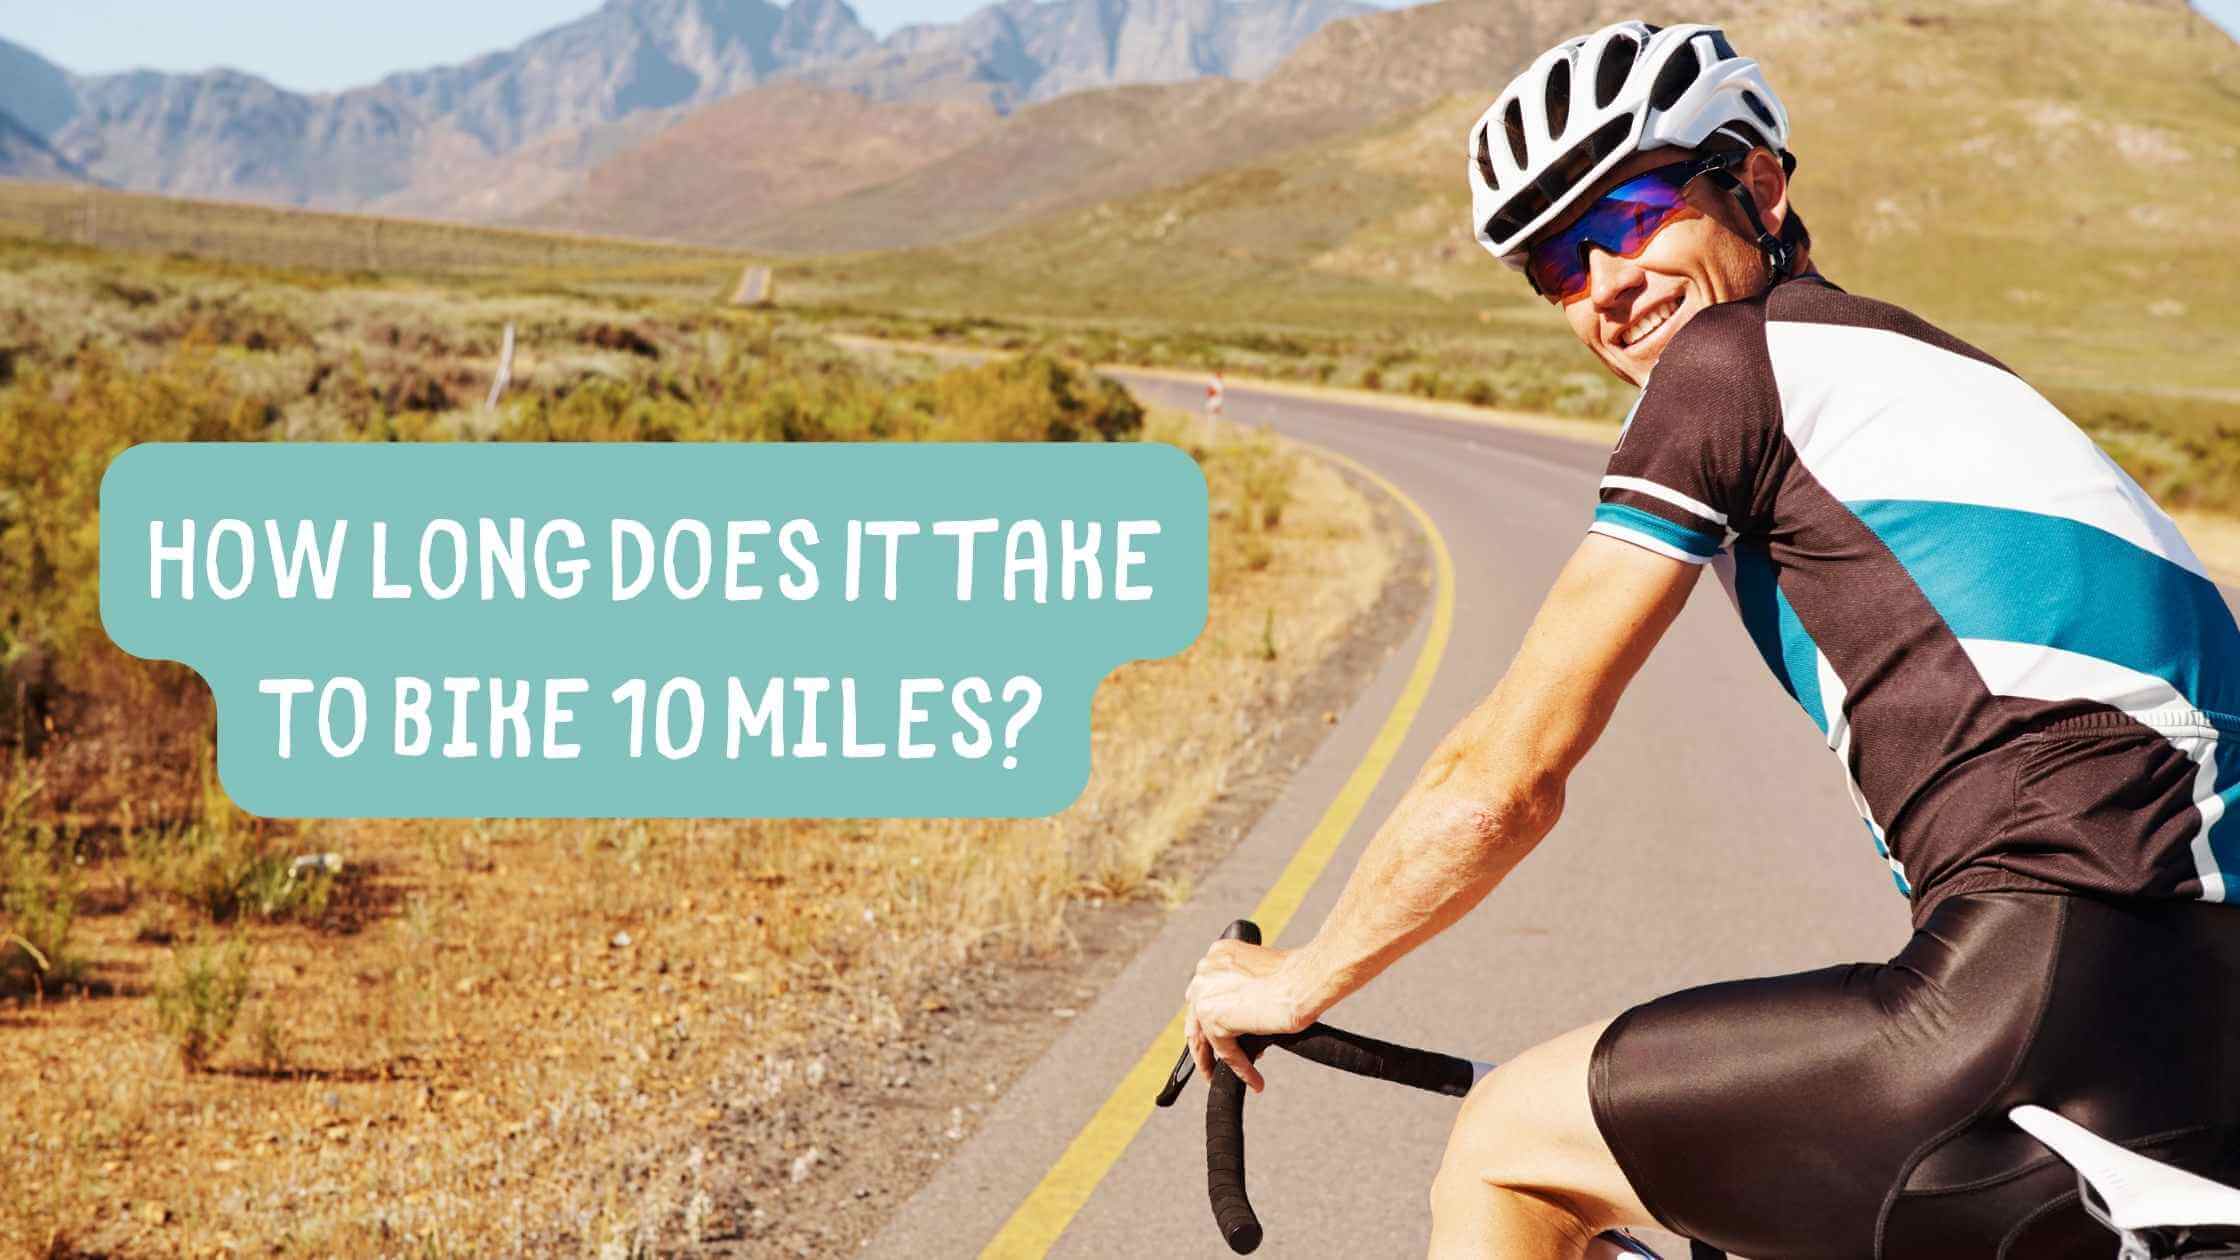 How Long Does It Take to Bike 10 Miles